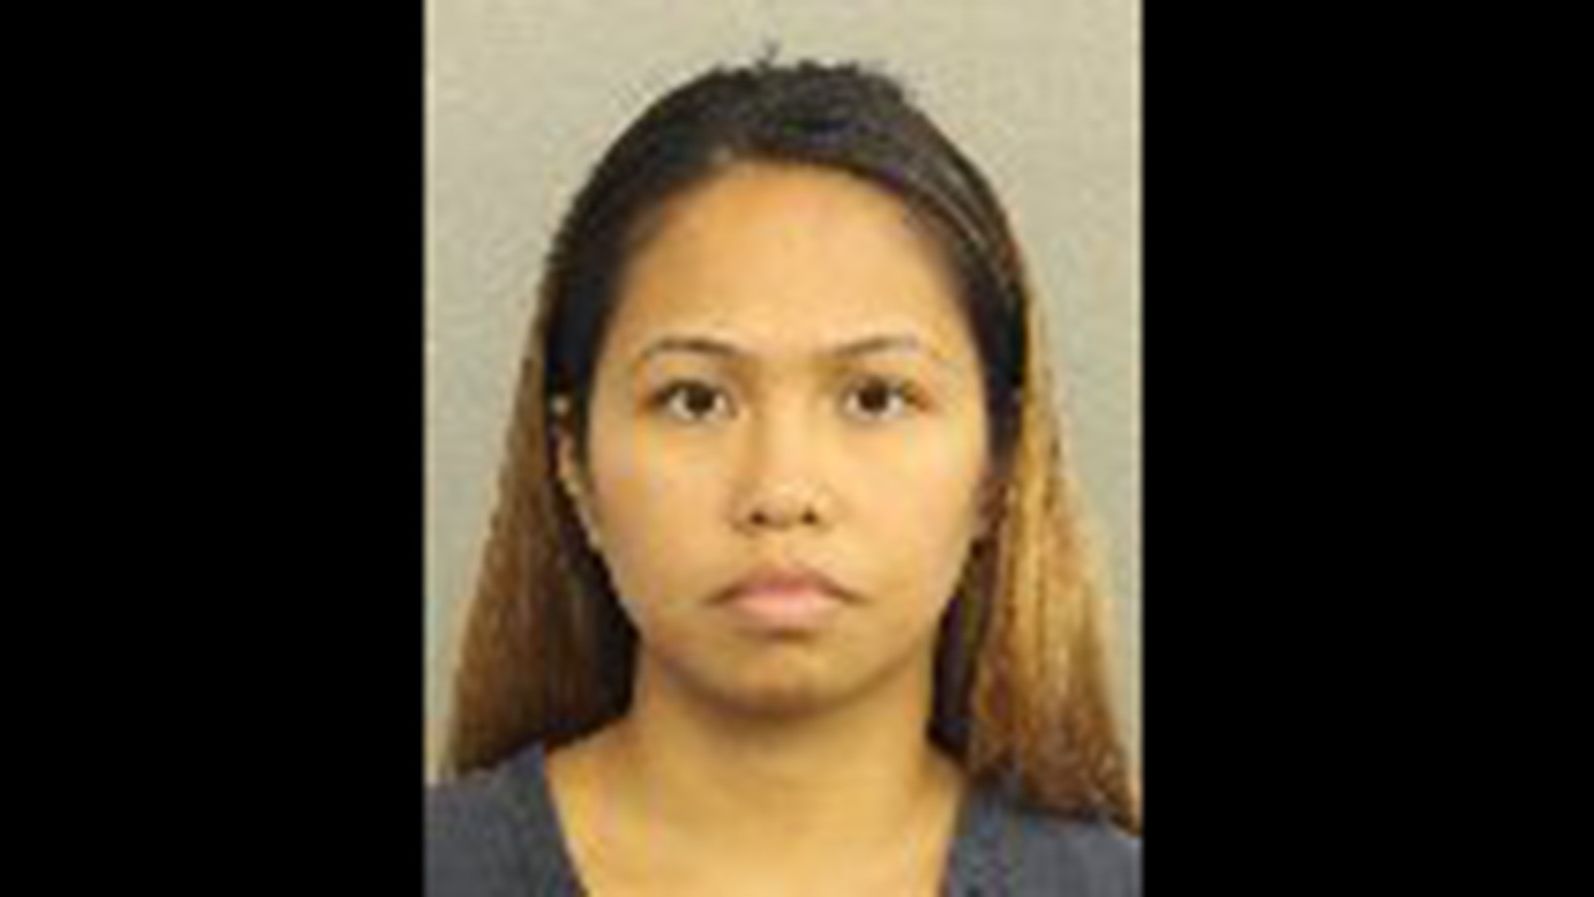 Katherine Magbanua was arrested and booked in Broward County Jail, Florida.